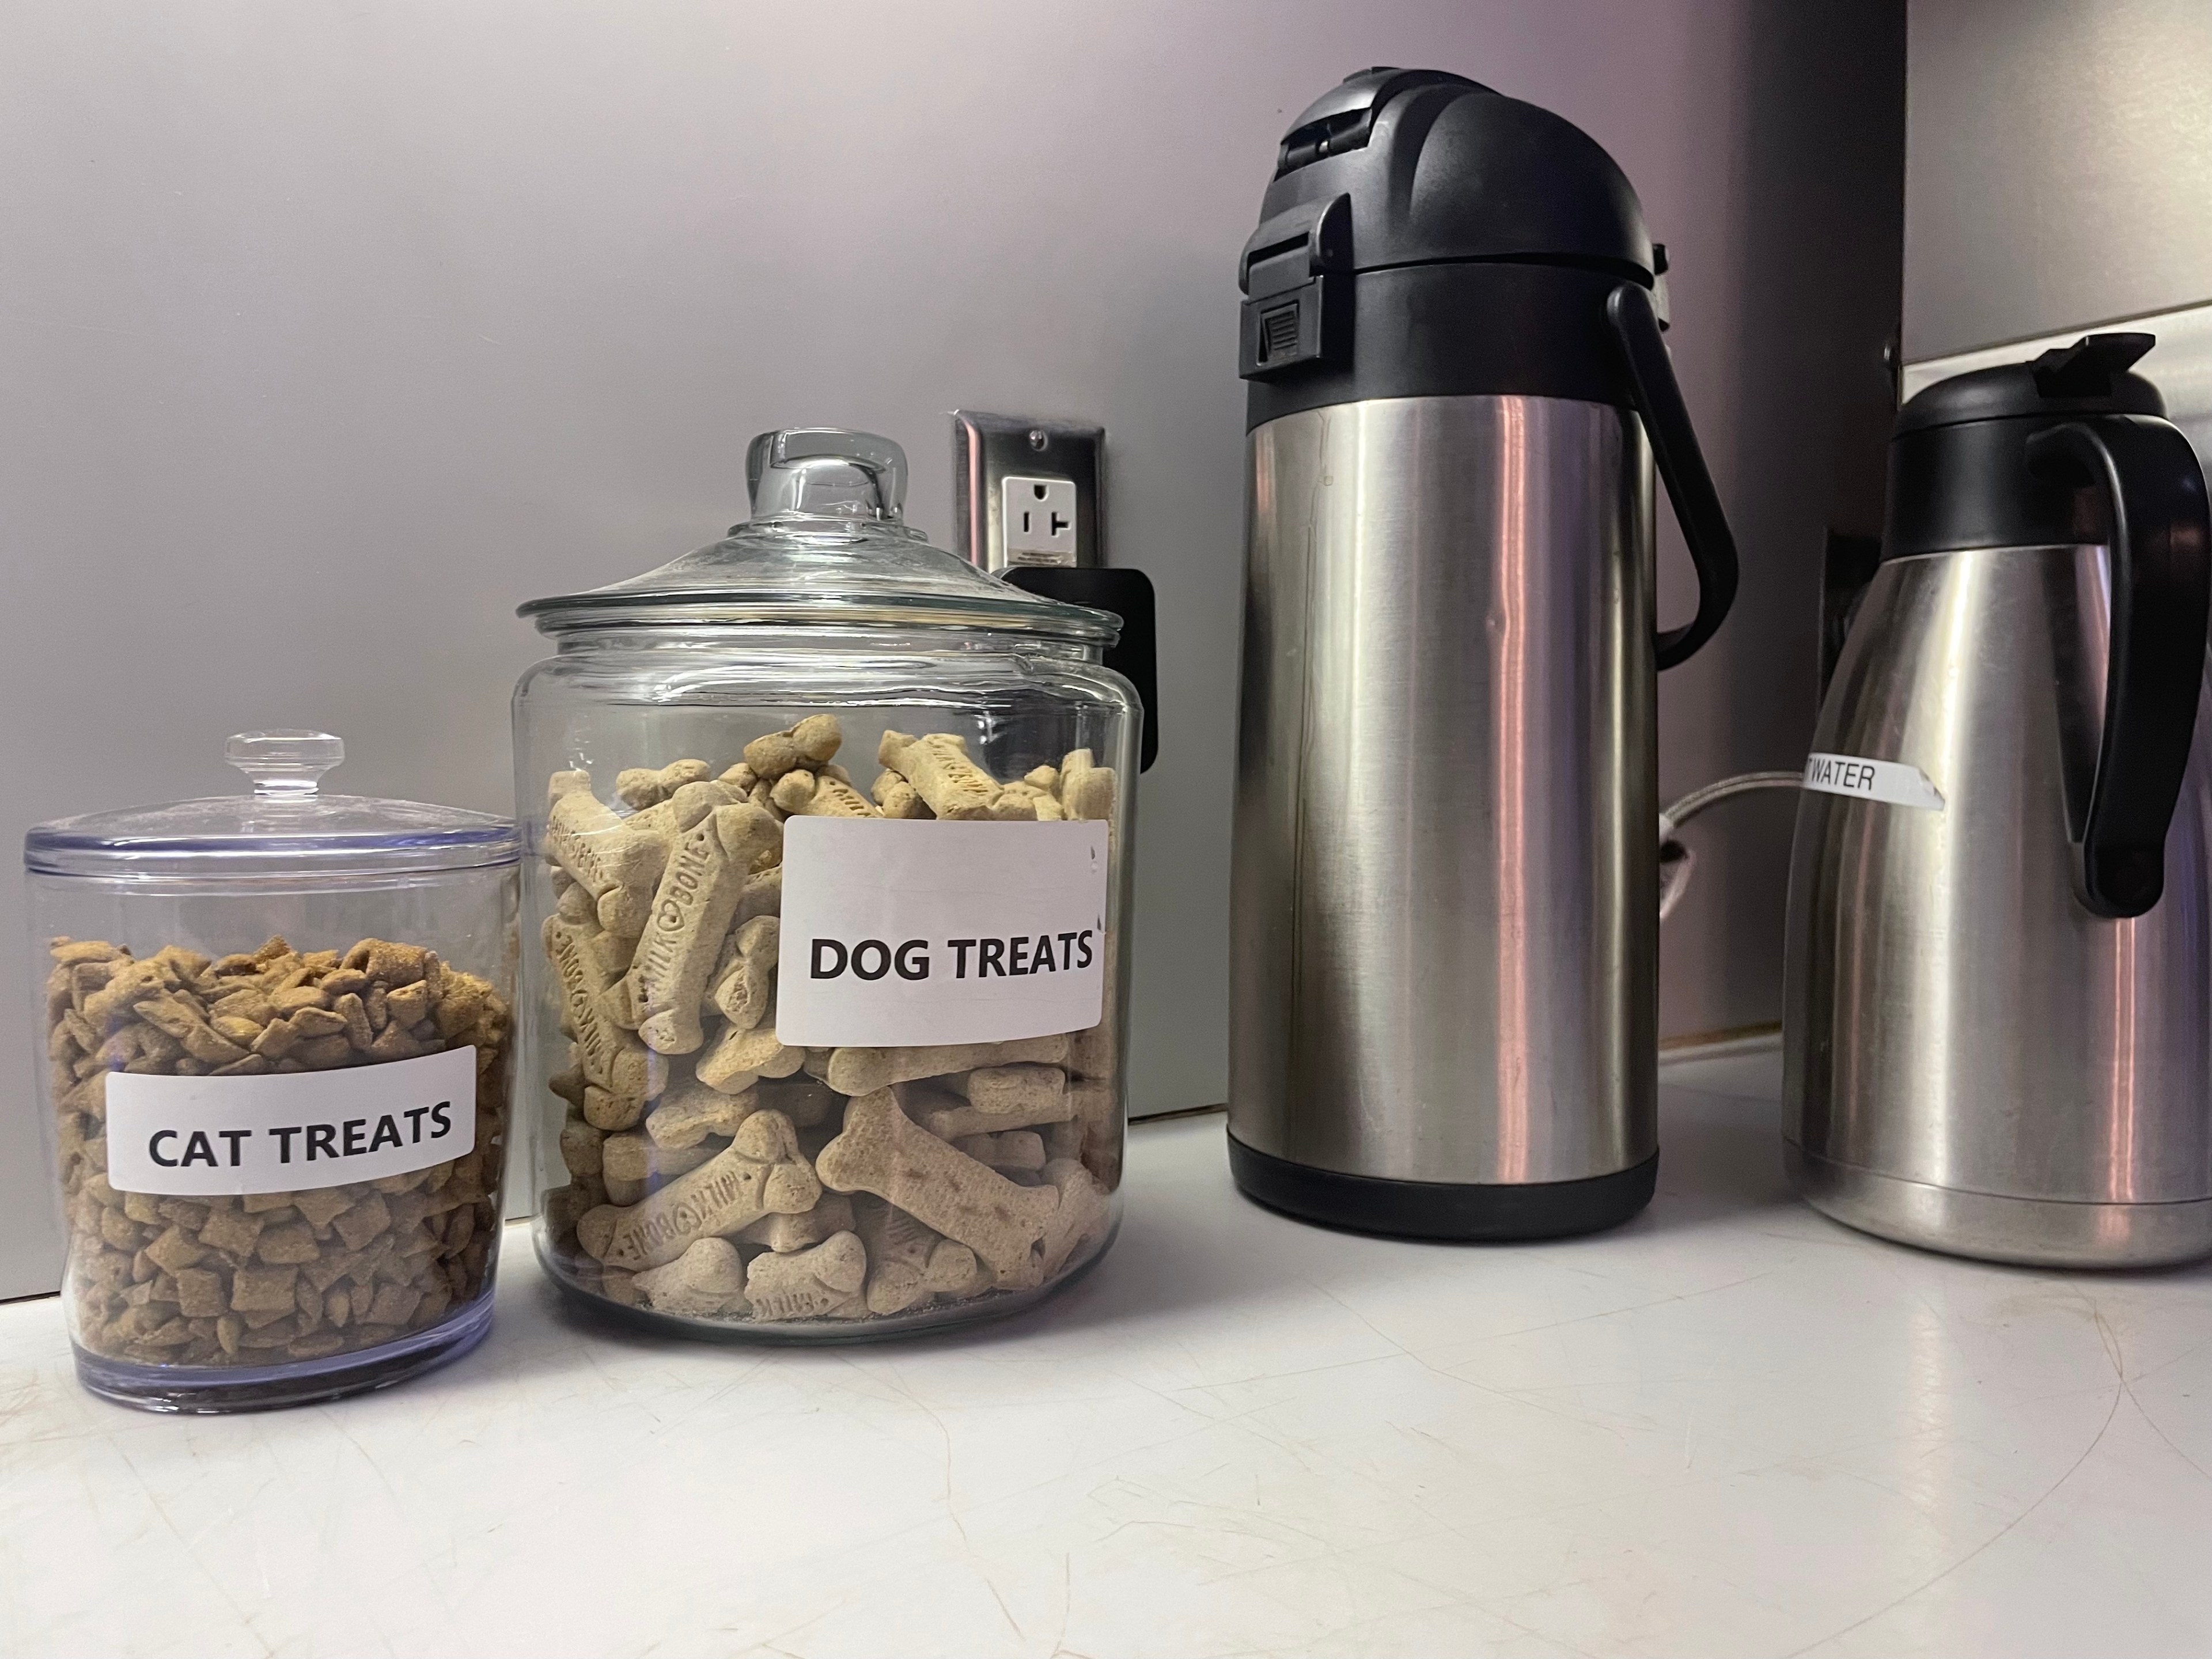 jars of dog and cat treats seen next to a coffee container.